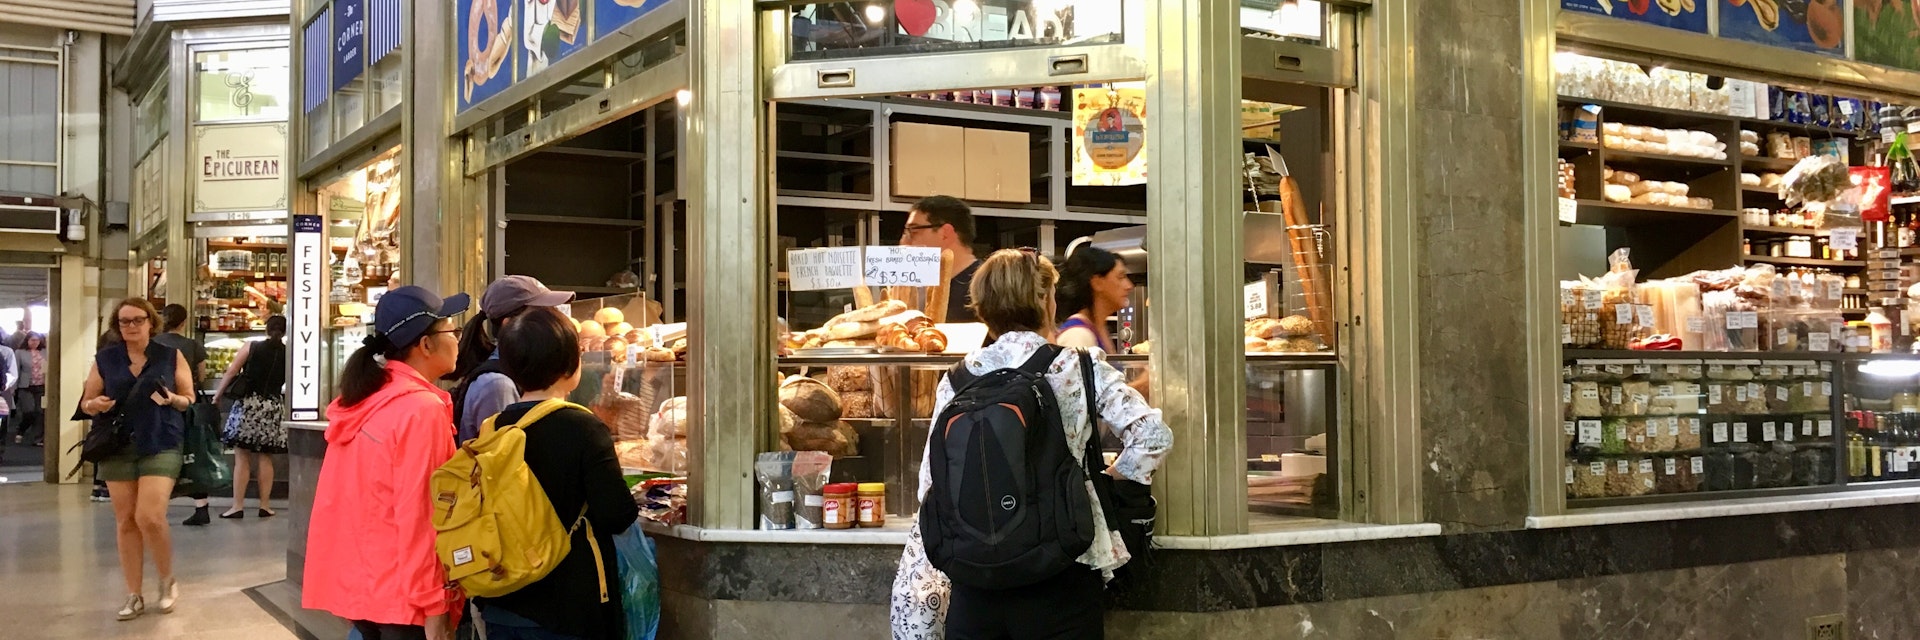 Melbourne, Australia: April 12, 2018: Customers buy pastries and other food goods from a stall in Queen Victoria Market.